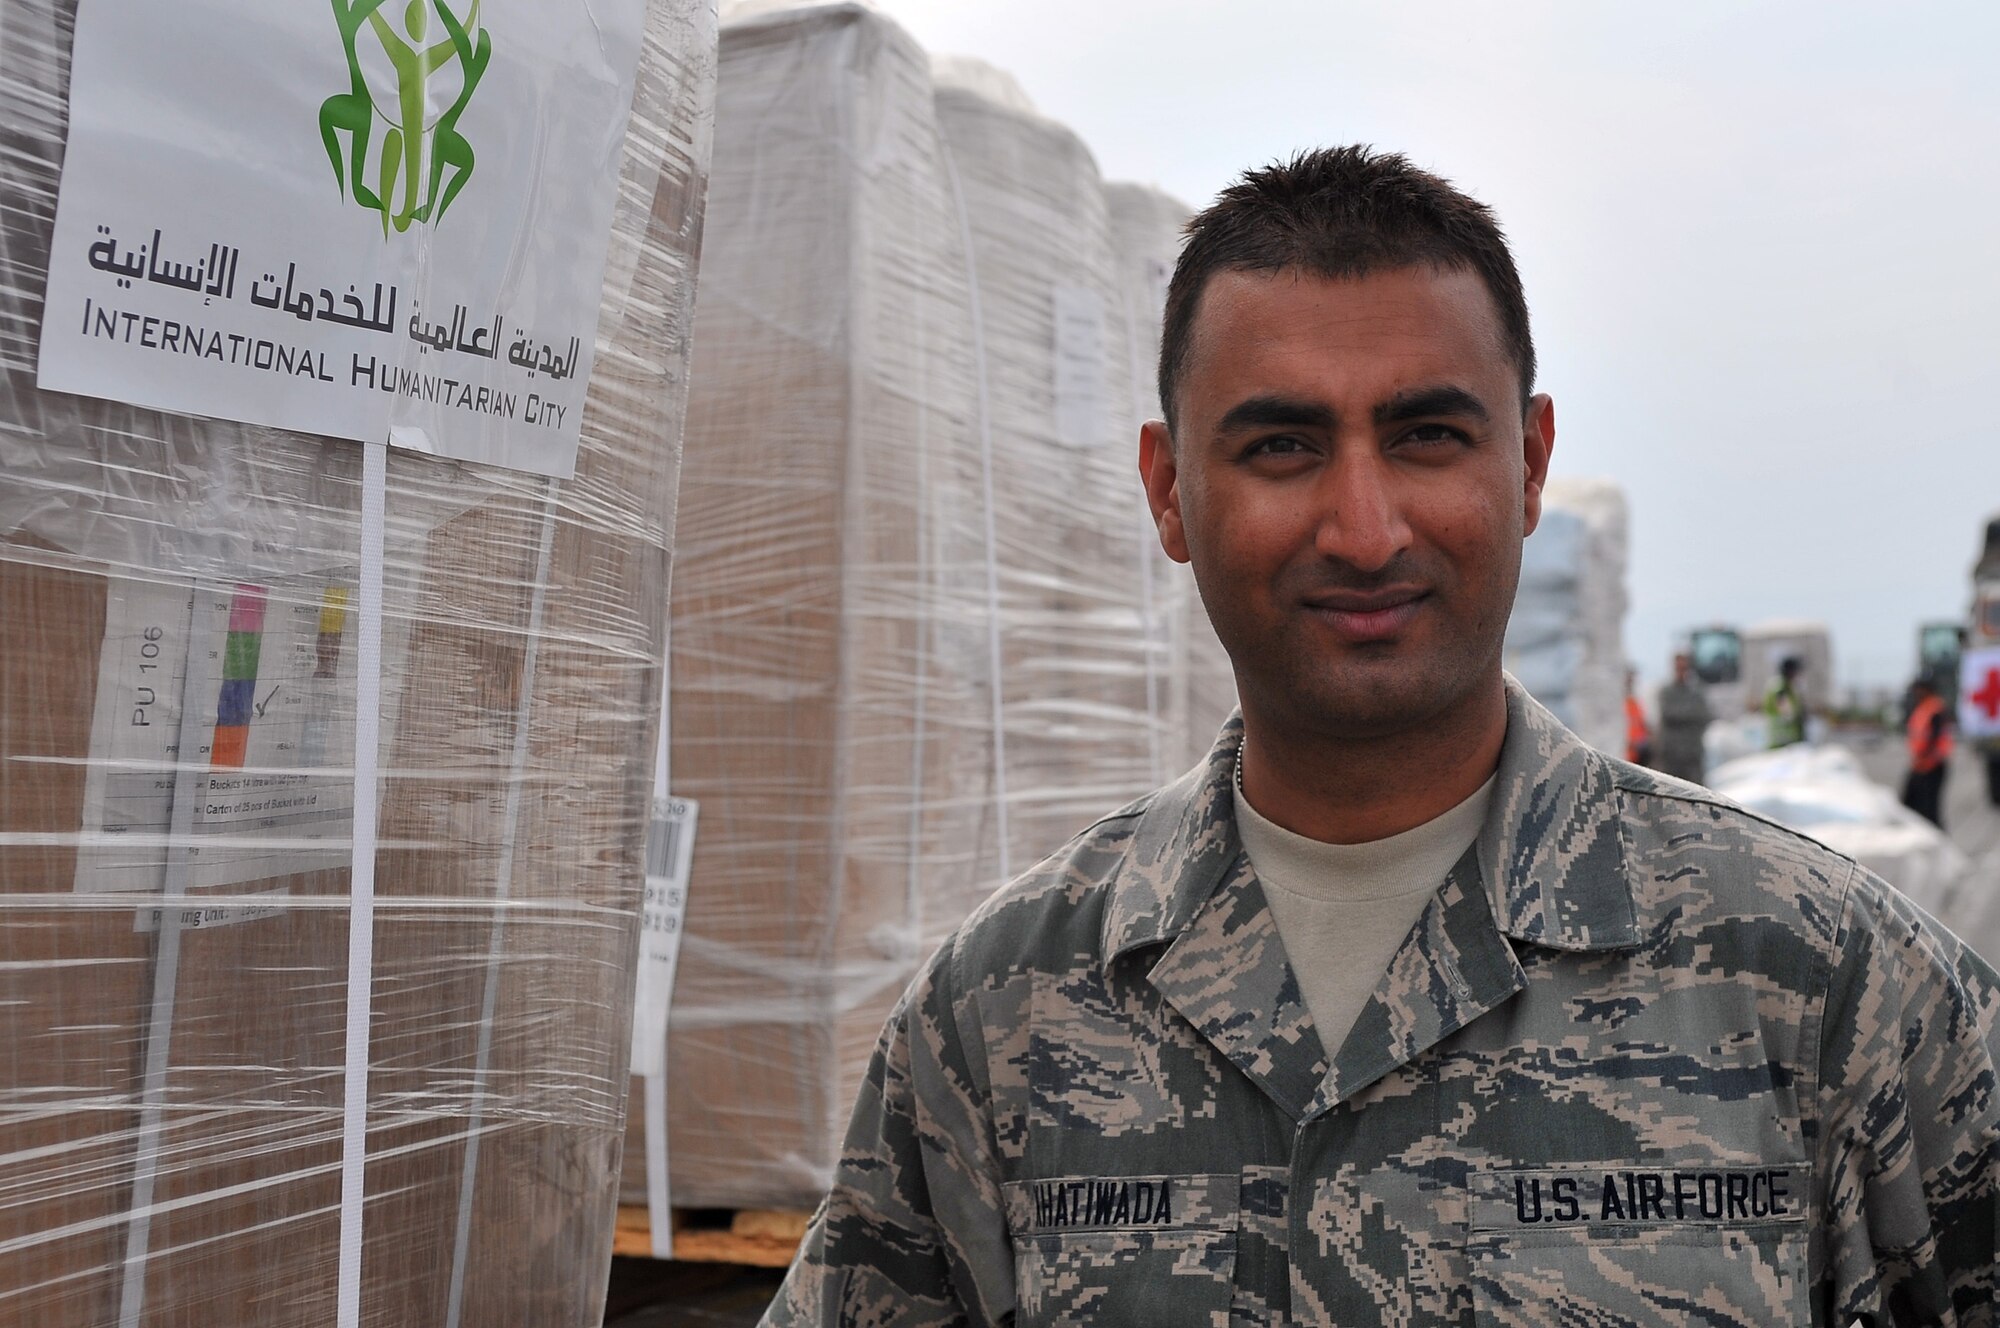 U.S. Air Force Senior Airman Manoj Khatiwada, 21st Medical Operations Squadron aerospace medical technician, stand in front of a pallet of humanitarian assistance and disaster relief supplies, Tribhuvan International Airport in Kathmandu, Nepal, May 8, 2015. Manoj joined a team from the 36th Contingency Response Group to assist U.S. Air Force, U.S. Department of State and U.S. Agency for International Development operations by assisting with communicating with the Nepalese Army as they process relief supplies following a magnitude 7.8 earthquake that struck the region April 25, 2015. (U.S. Air Force photo by Staff Sgt. Melissa White/Released)